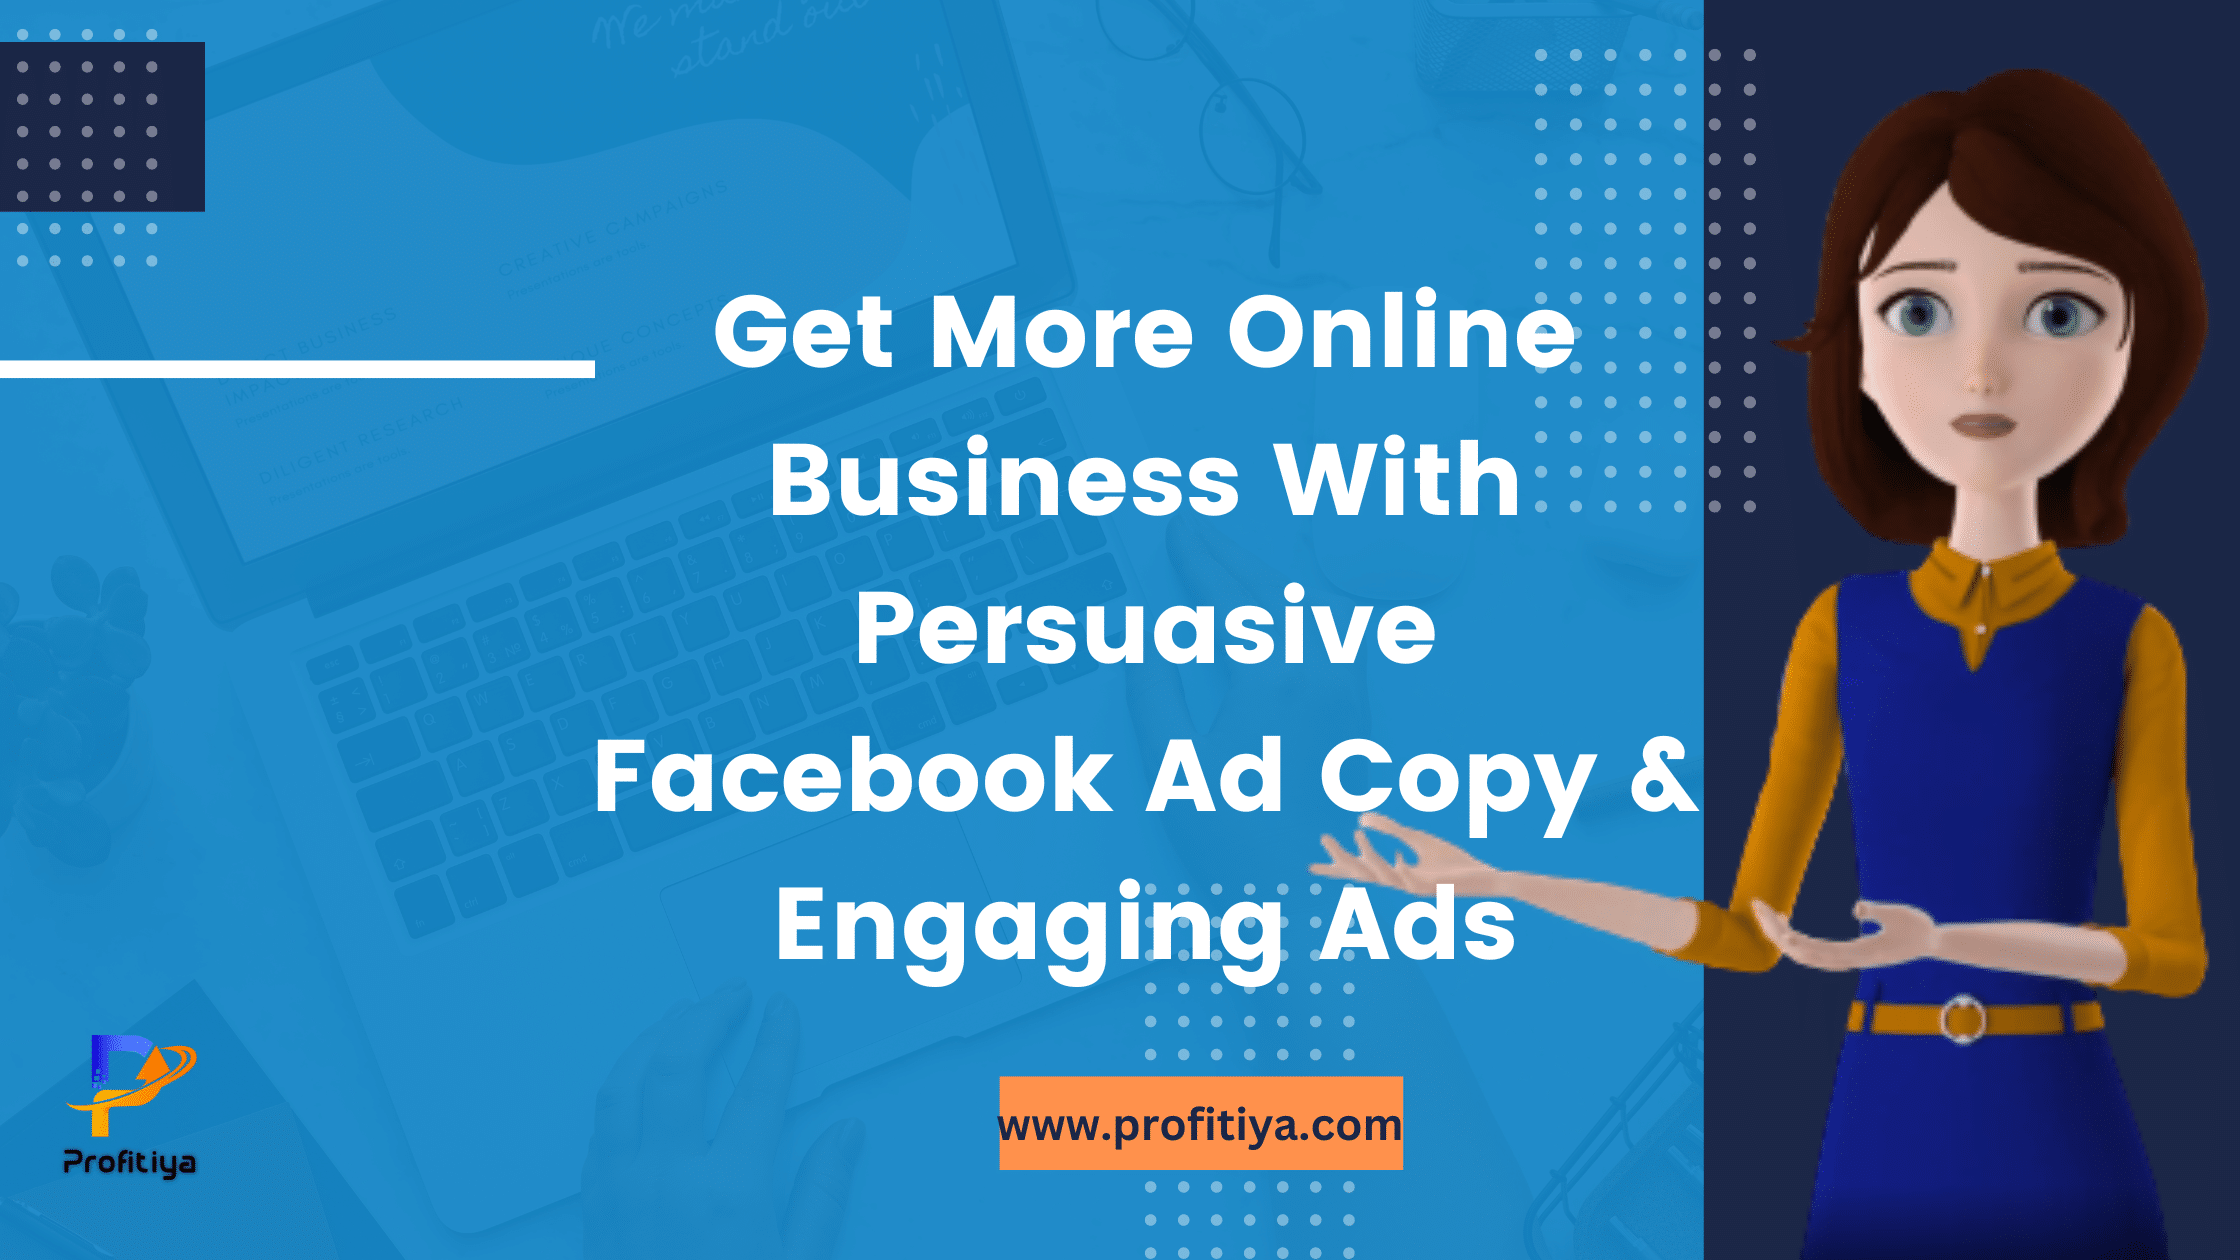 Get More Online Business With Persuasive Facebook Ad Copy And Engaging Ads (1)